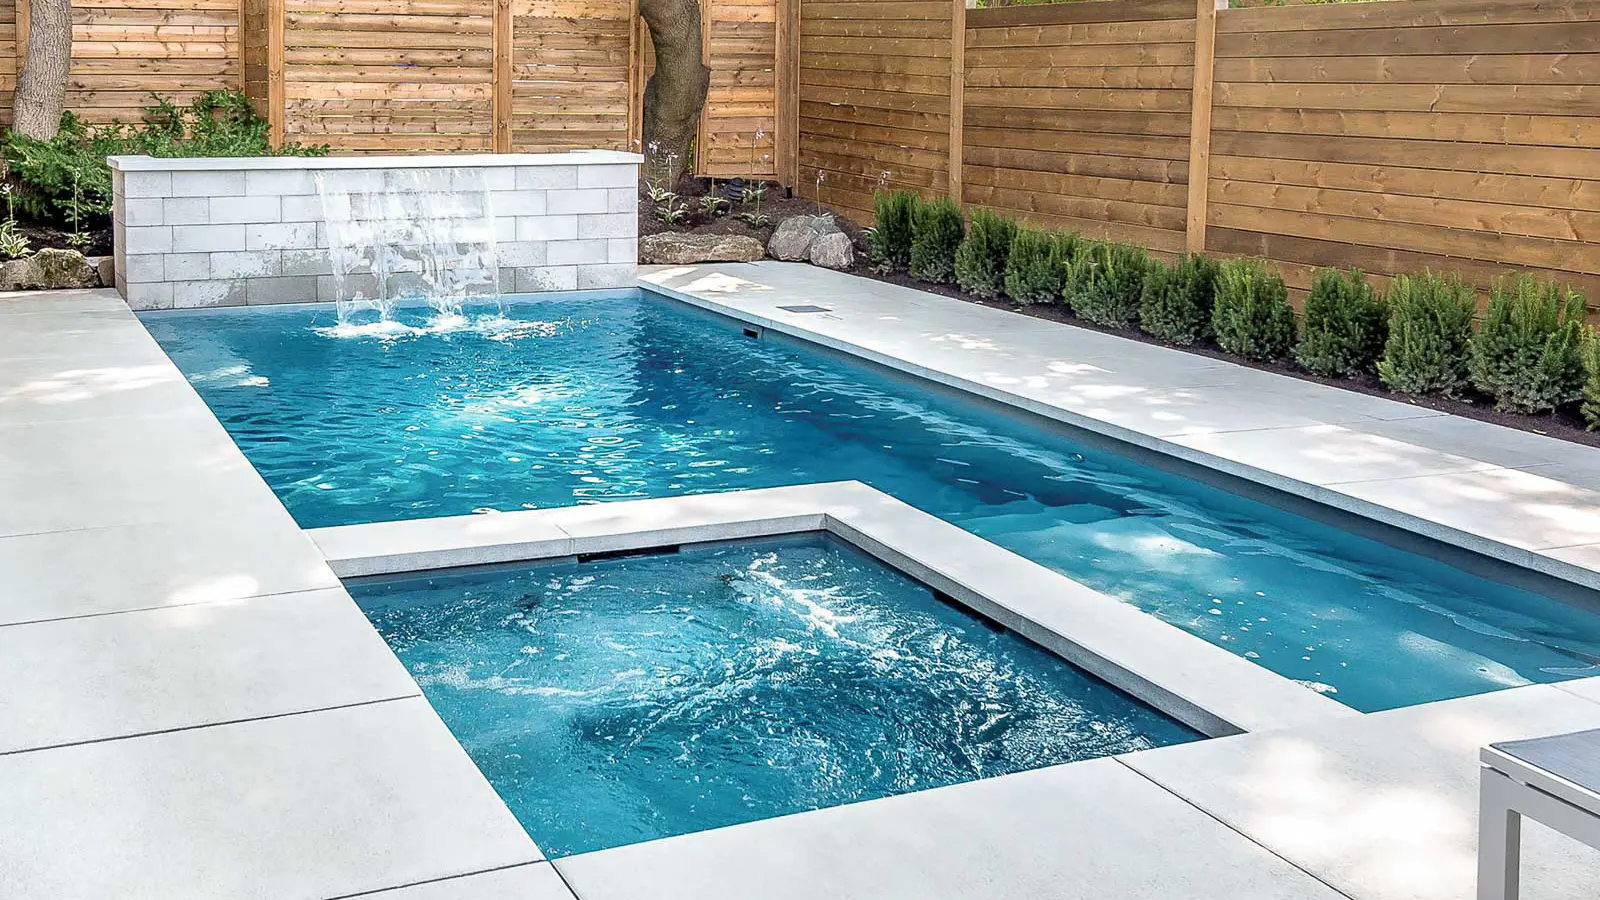 Leisure Pools Limitless rectangular fiberglass swimming pool with built-in spa and splash deck